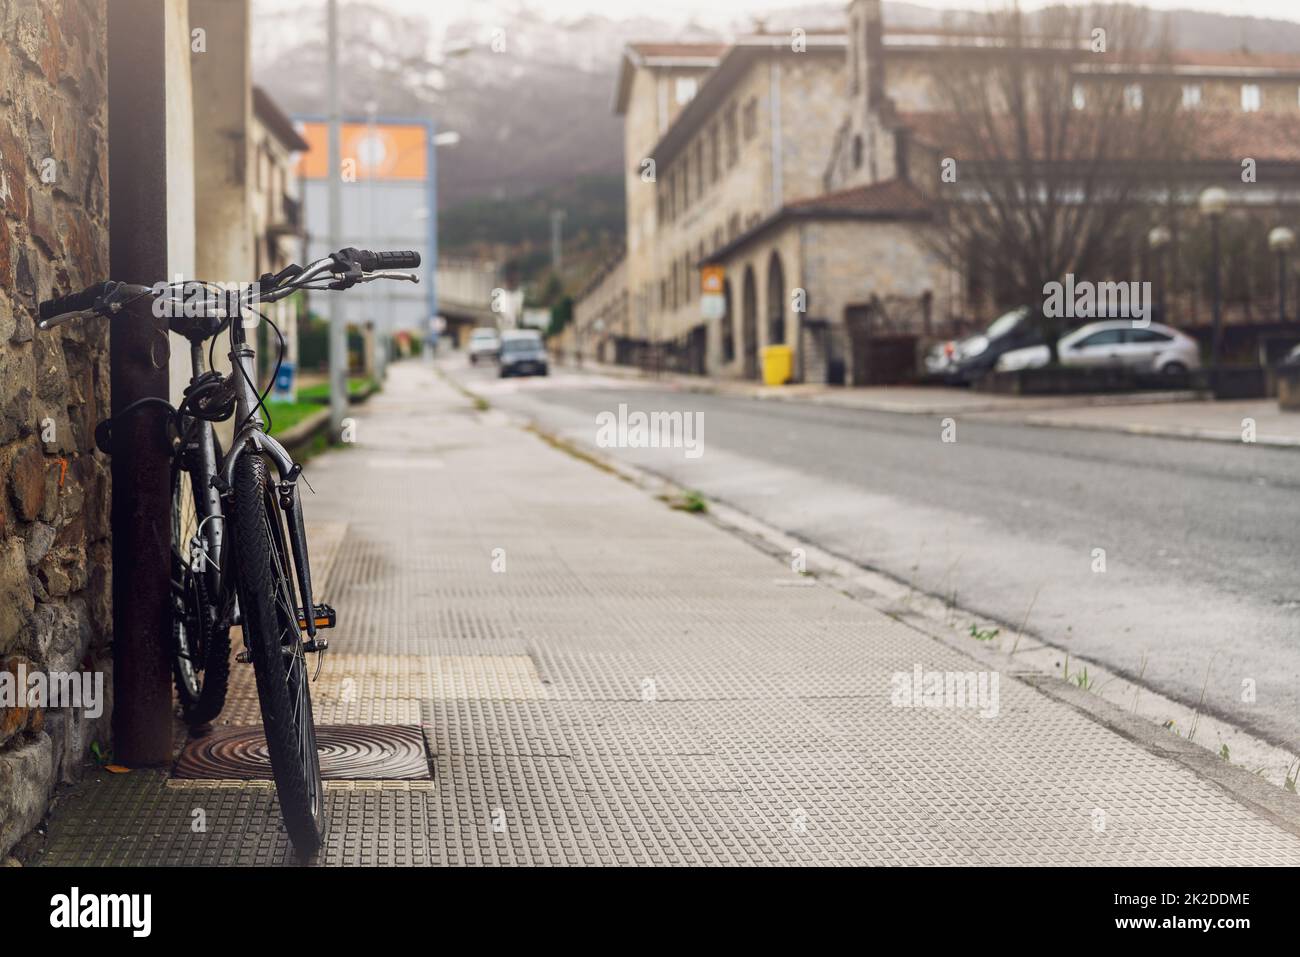 Bicycle parked on sidewalk near city street in Spain. Bike lean on pole beside old building. Front view of bicycle on blurred building, car driving on the road, and mountain background. Europe travel. Stock Photo